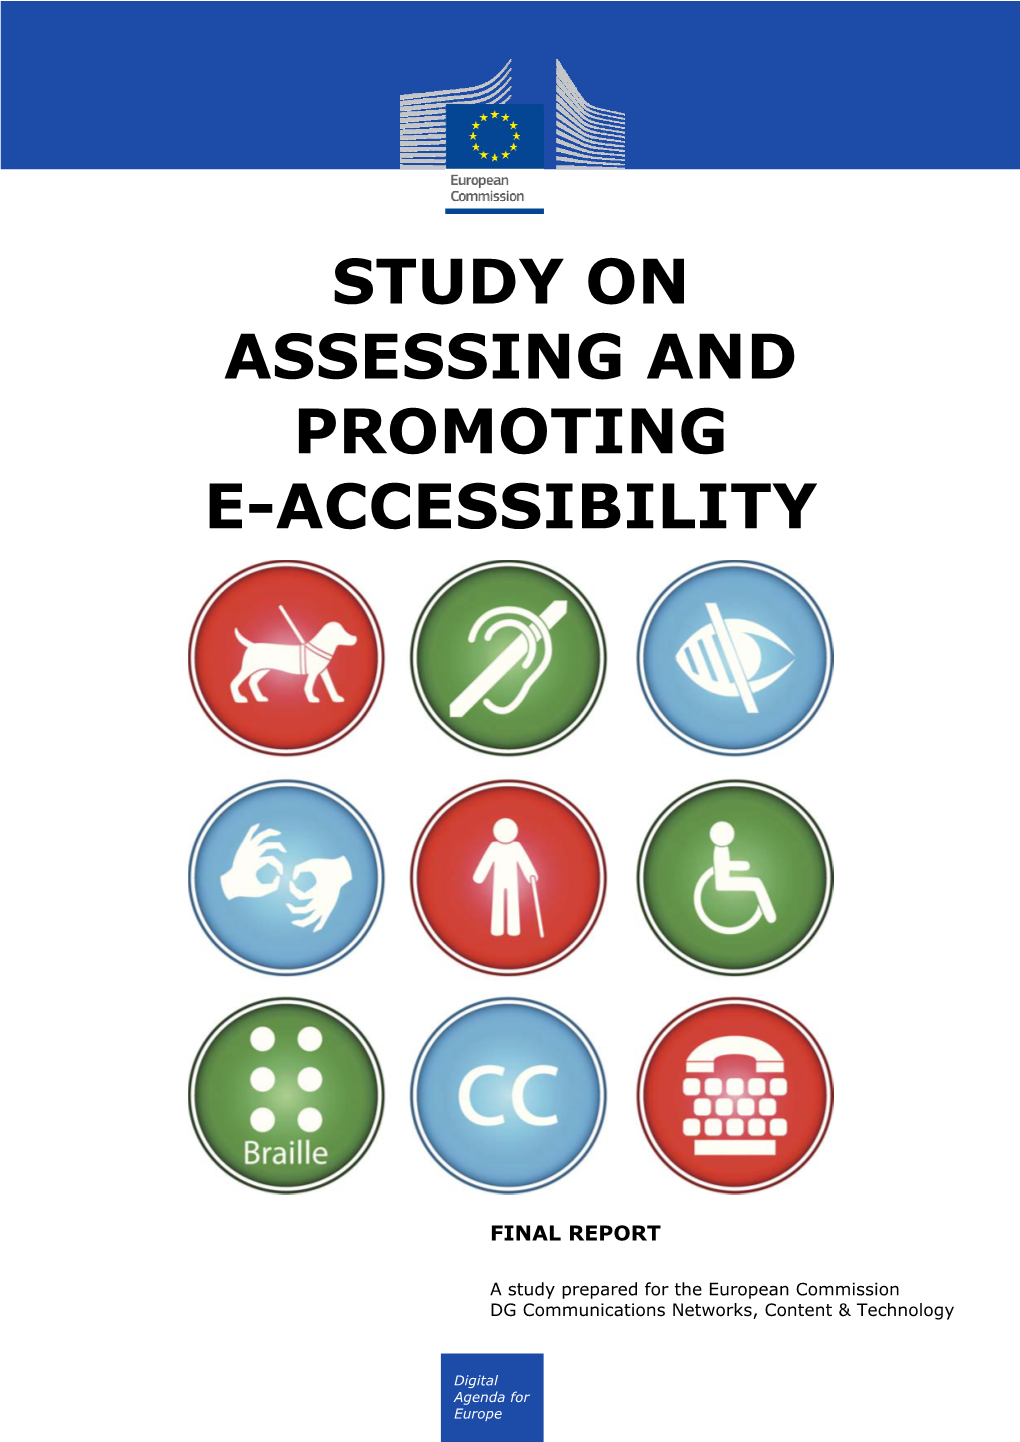 Study on Assessing and Promoting E-Accessibility